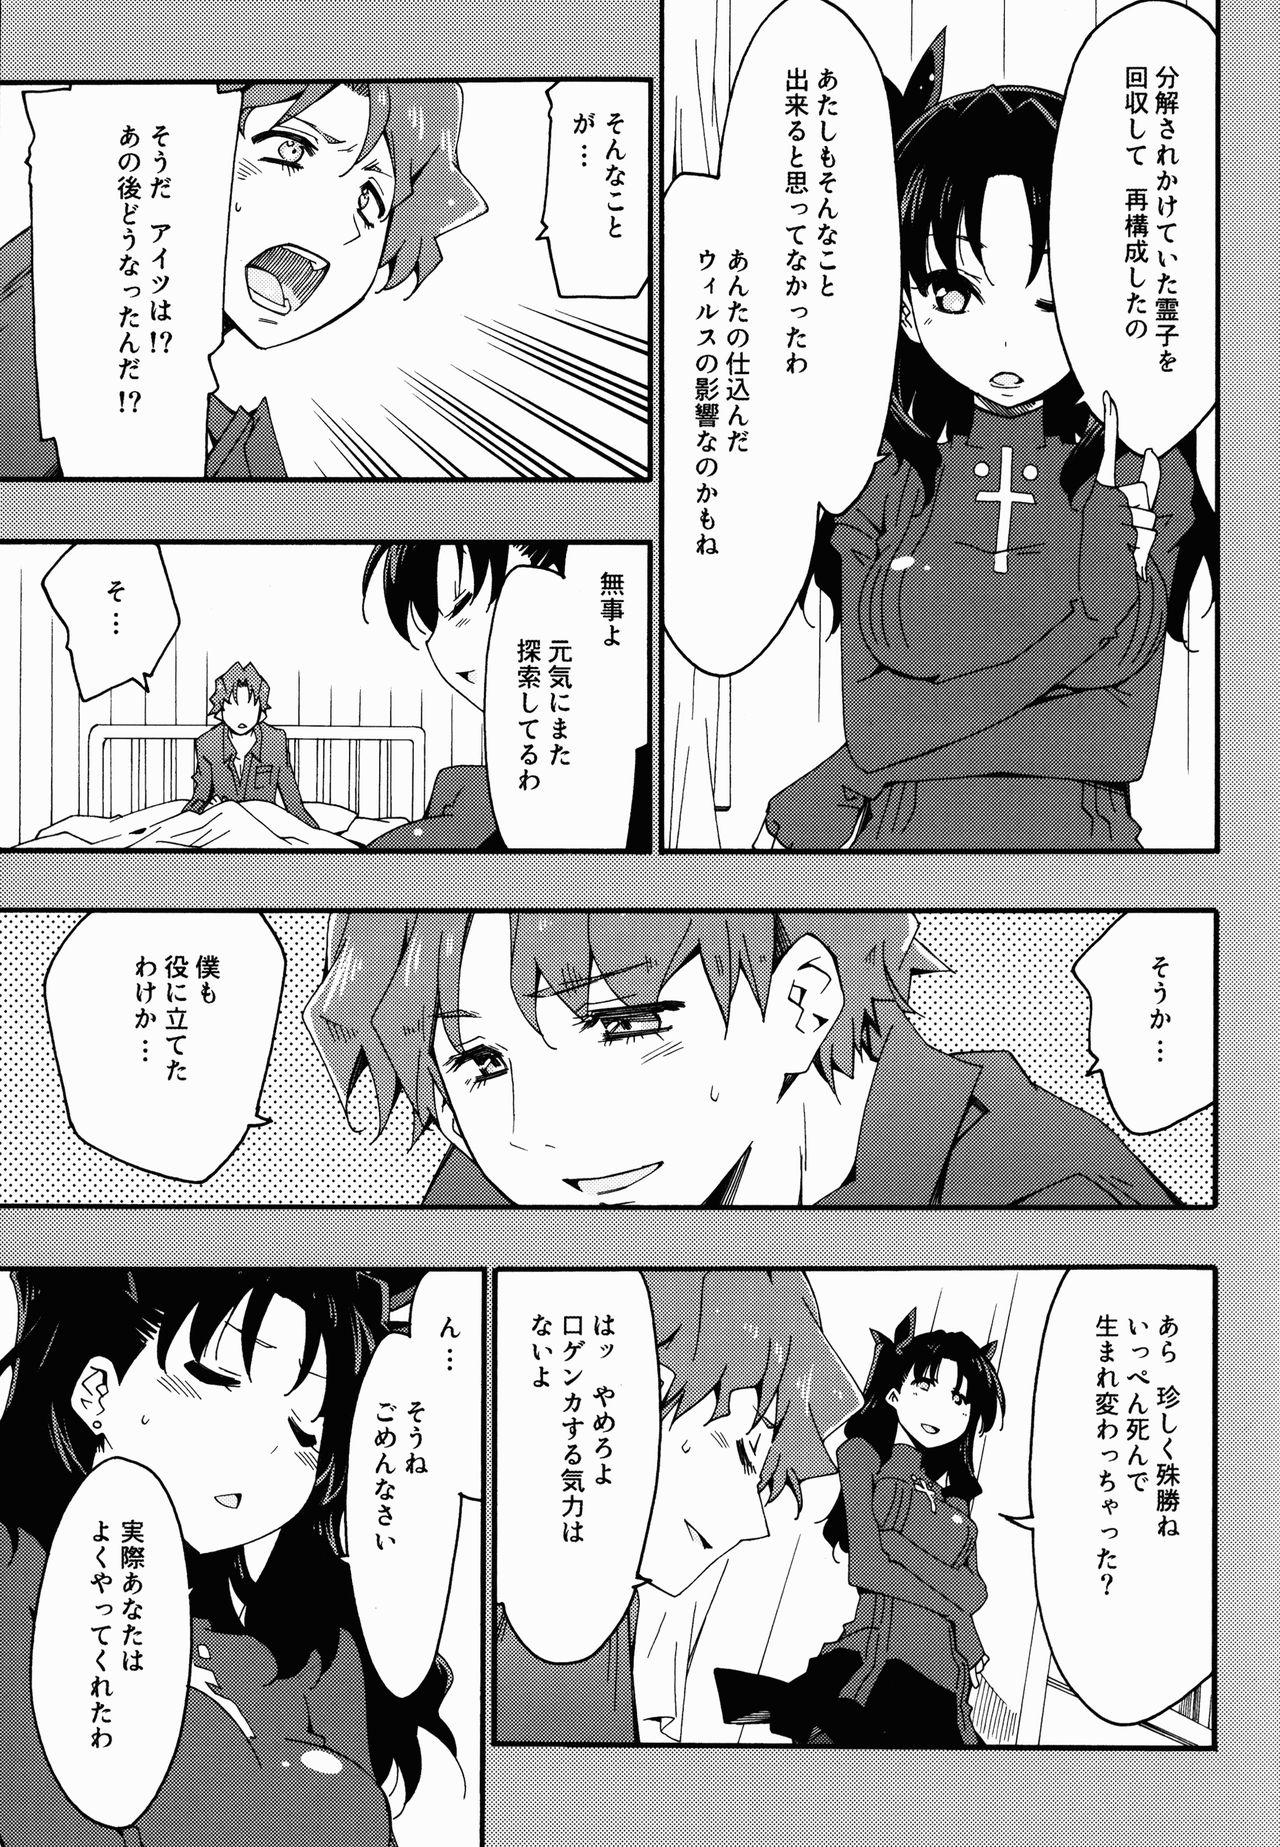 Groupfuck Melty/kiss - Fate extra Amateurs Gone Wild - Page 7